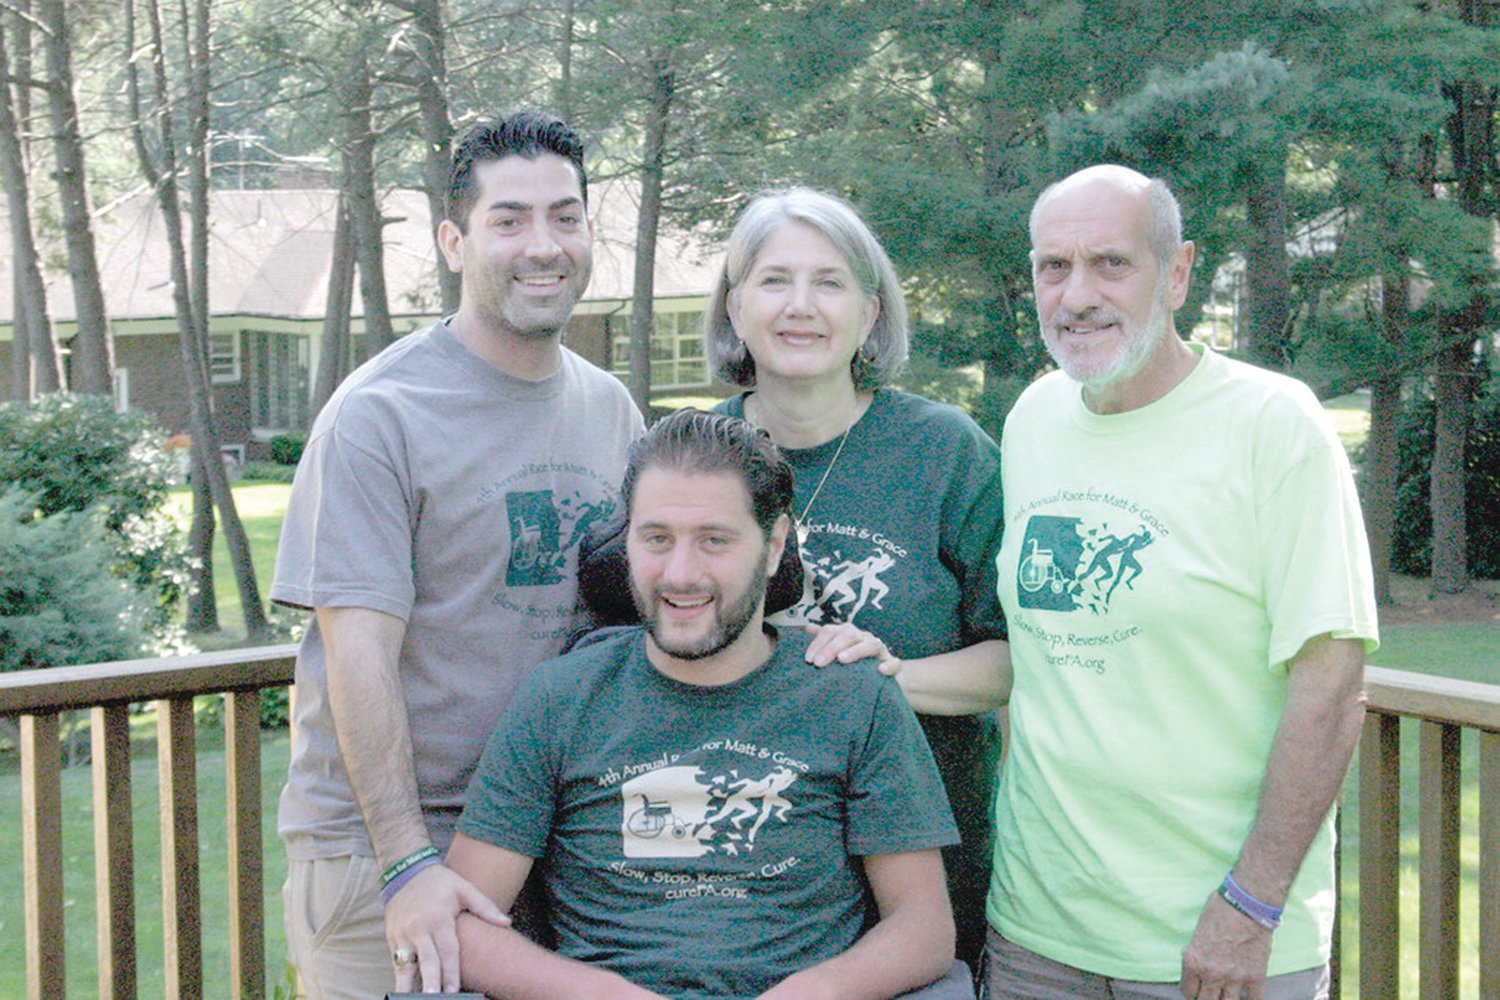 FA-MILY: Matt DiIorio (at front), his family and friends believed connecting with the FA community made a major difference in their lives. Pictured, back from left, are Michael Crawley, Sally Ann DiIorio and Jack DiIorio.